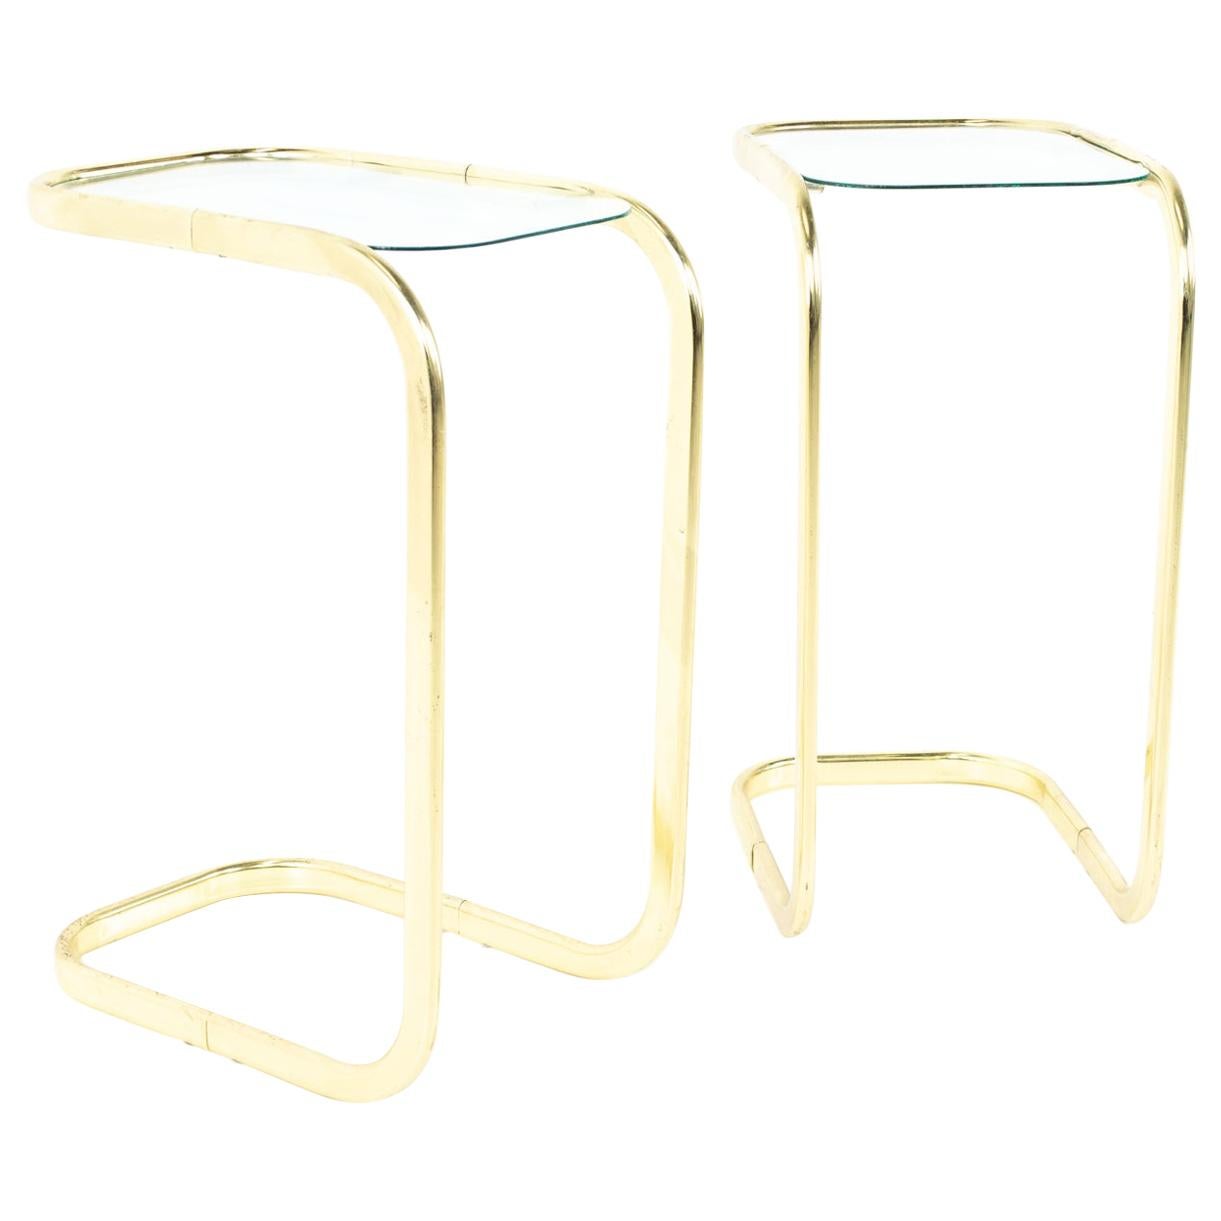 Milo Baughman Style MCM Brass and Glass Cantilever Side End Tables, Pair